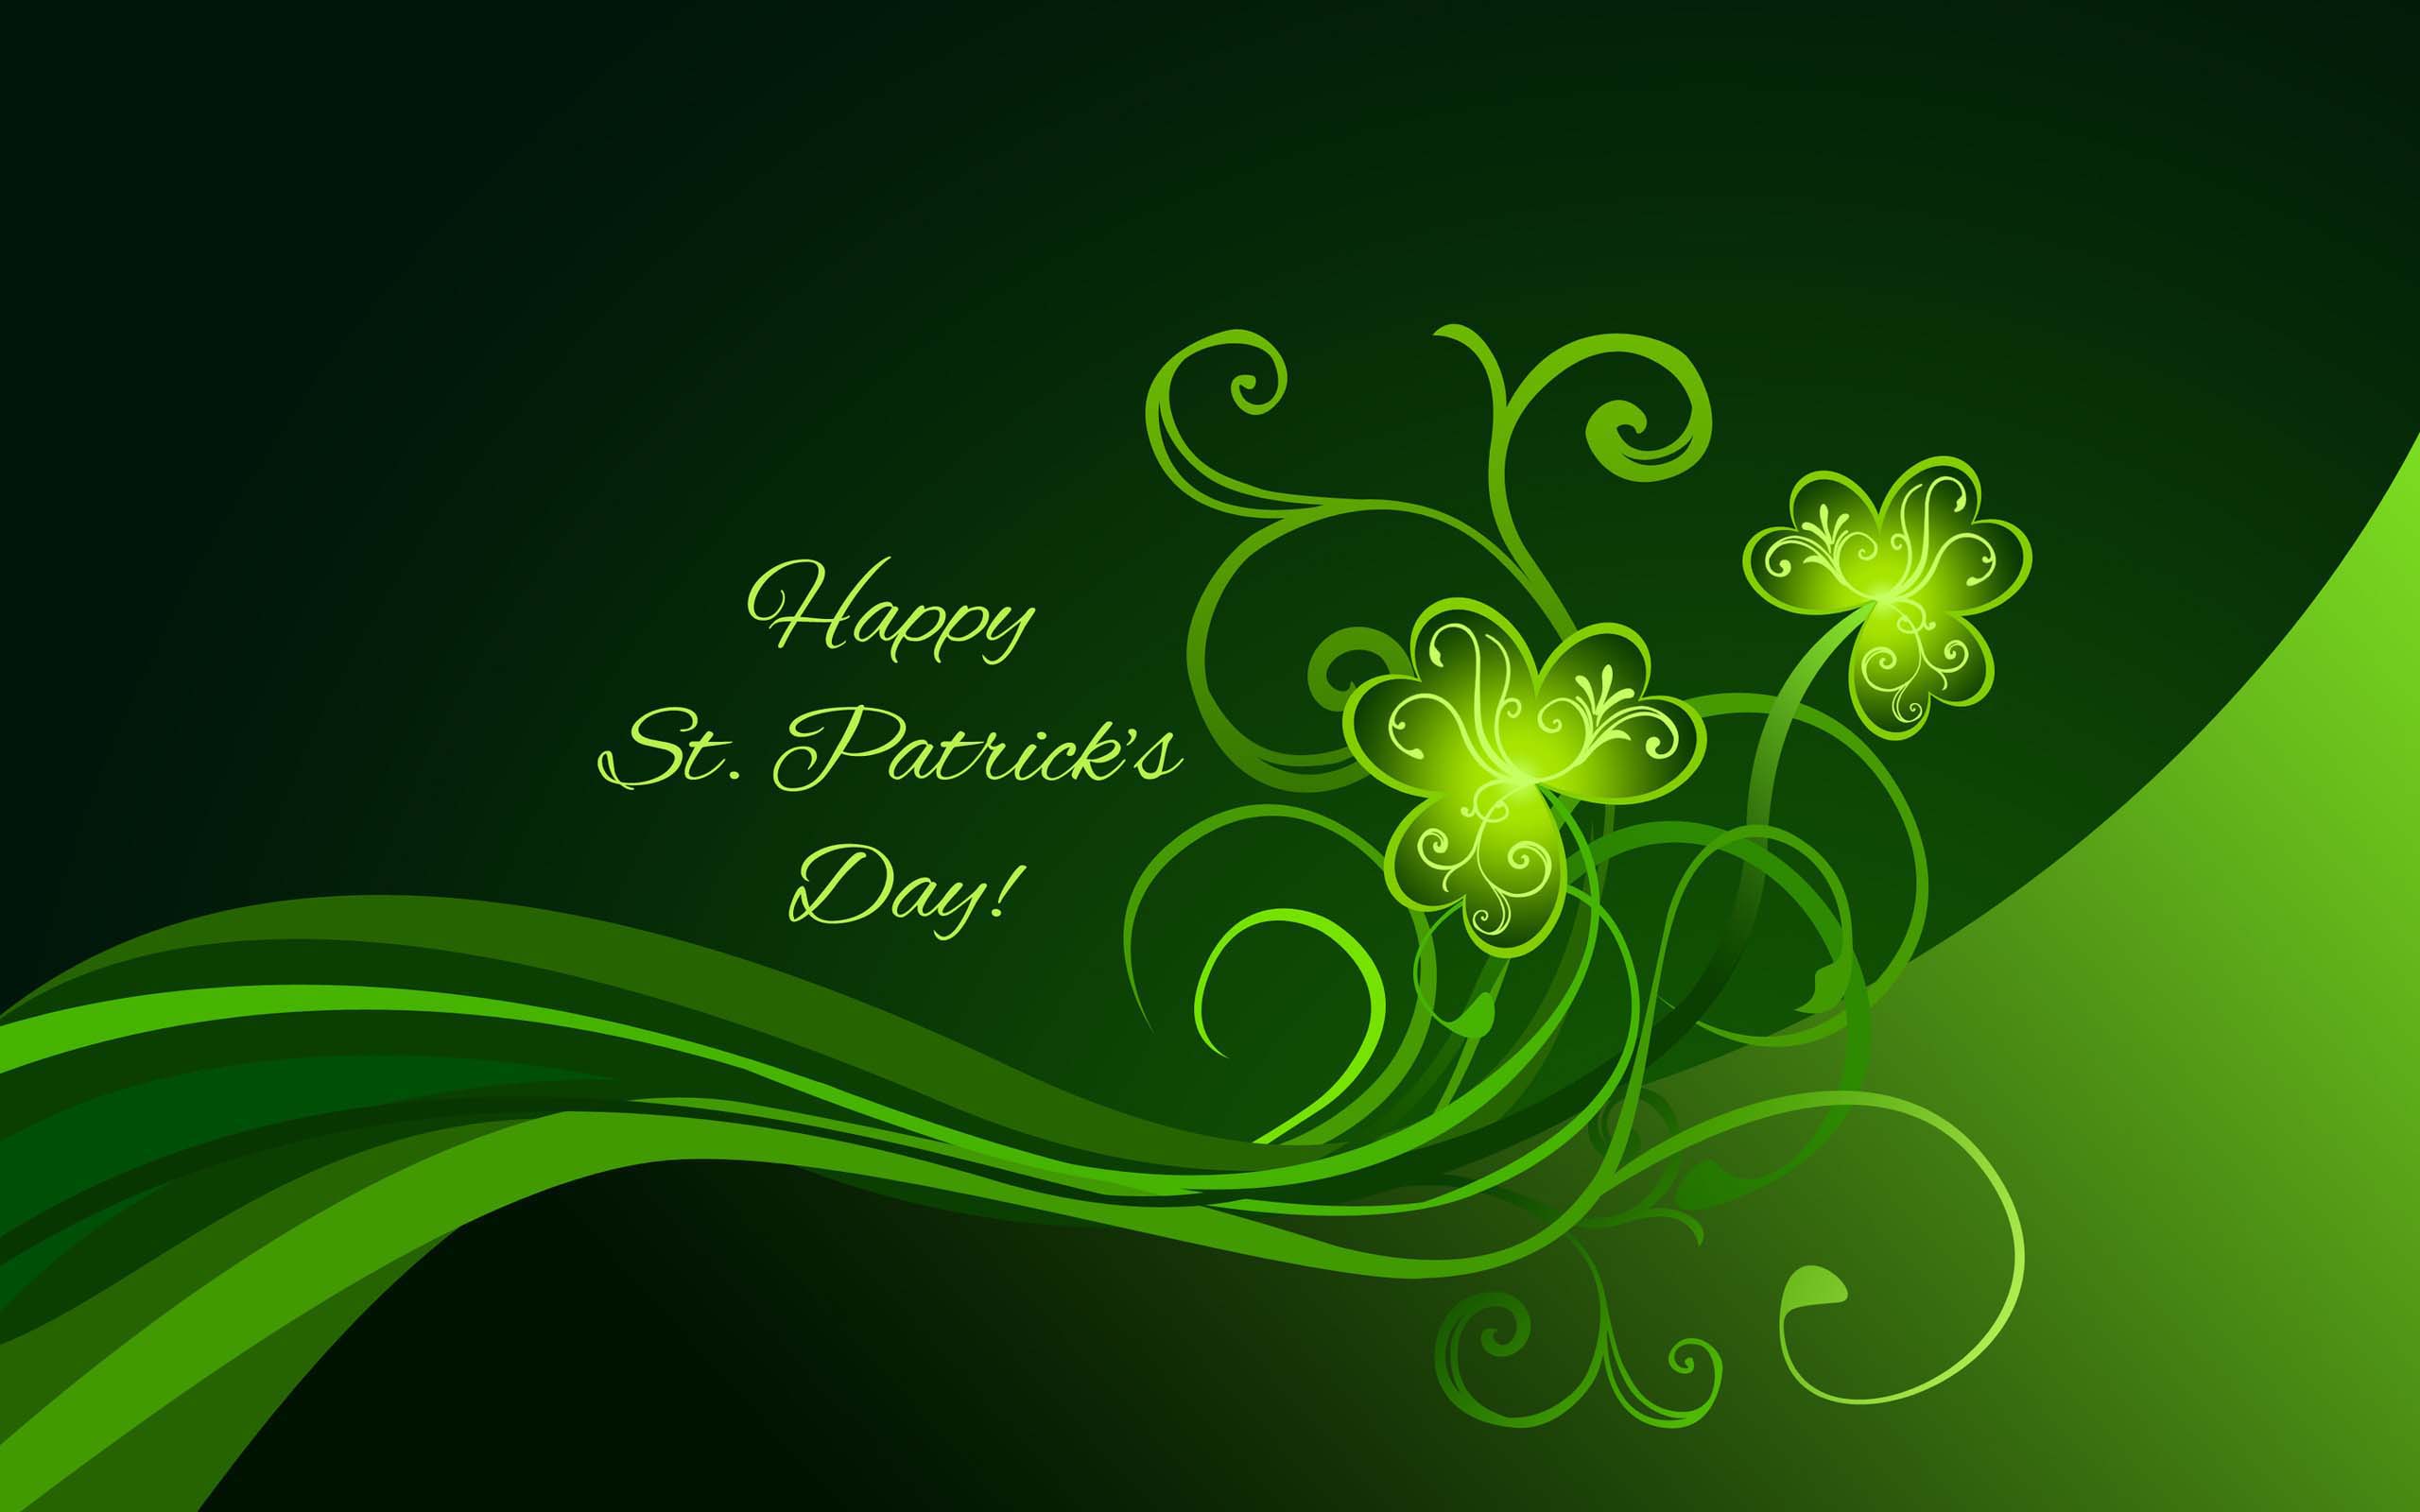 Happy Saint Patrick's Day Wishes Quotes Sayings Images Funny ...